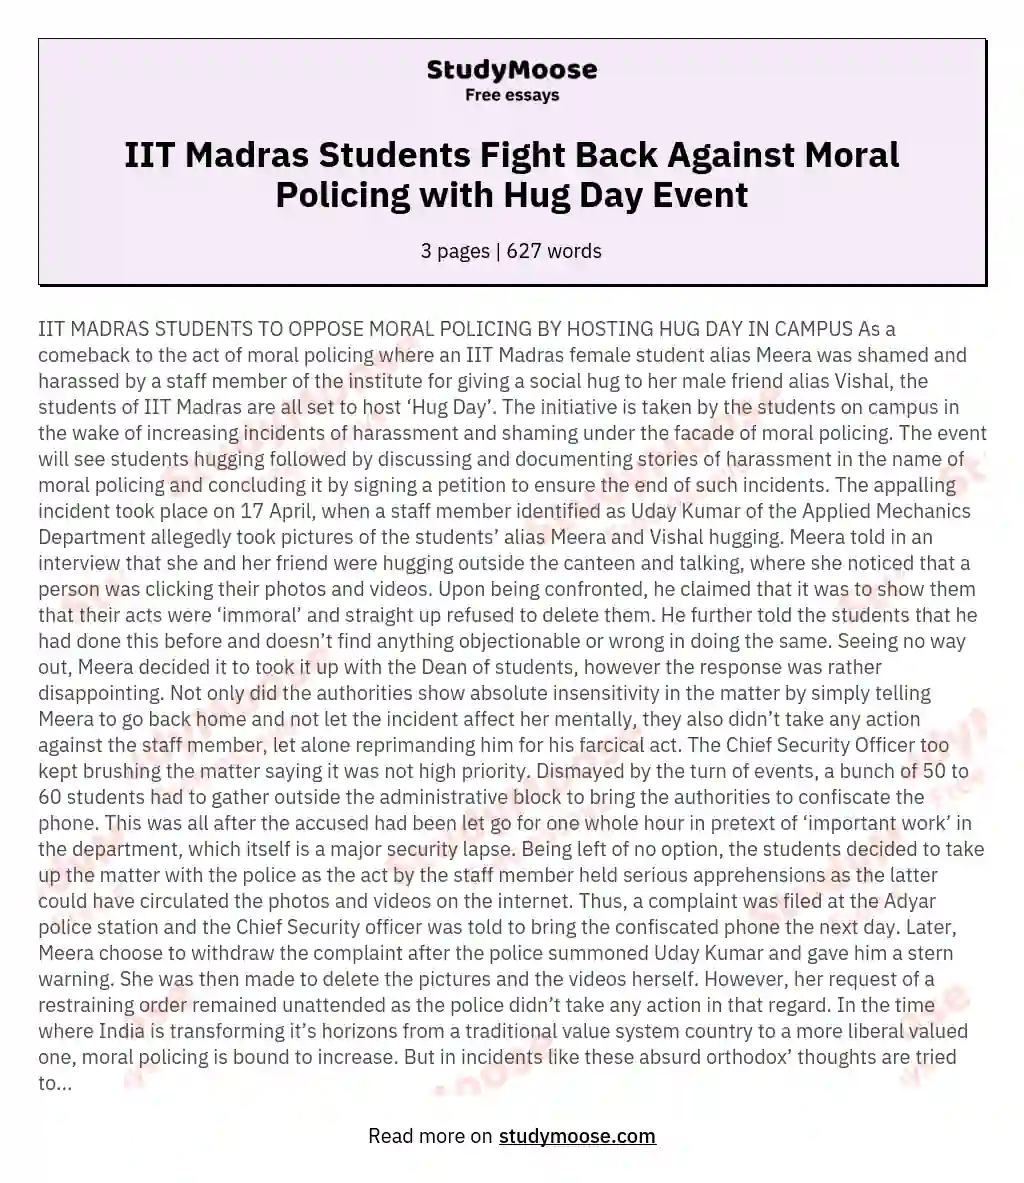 IIT Madras Students Fight Back Against Moral Policing with Hug Day Event essay